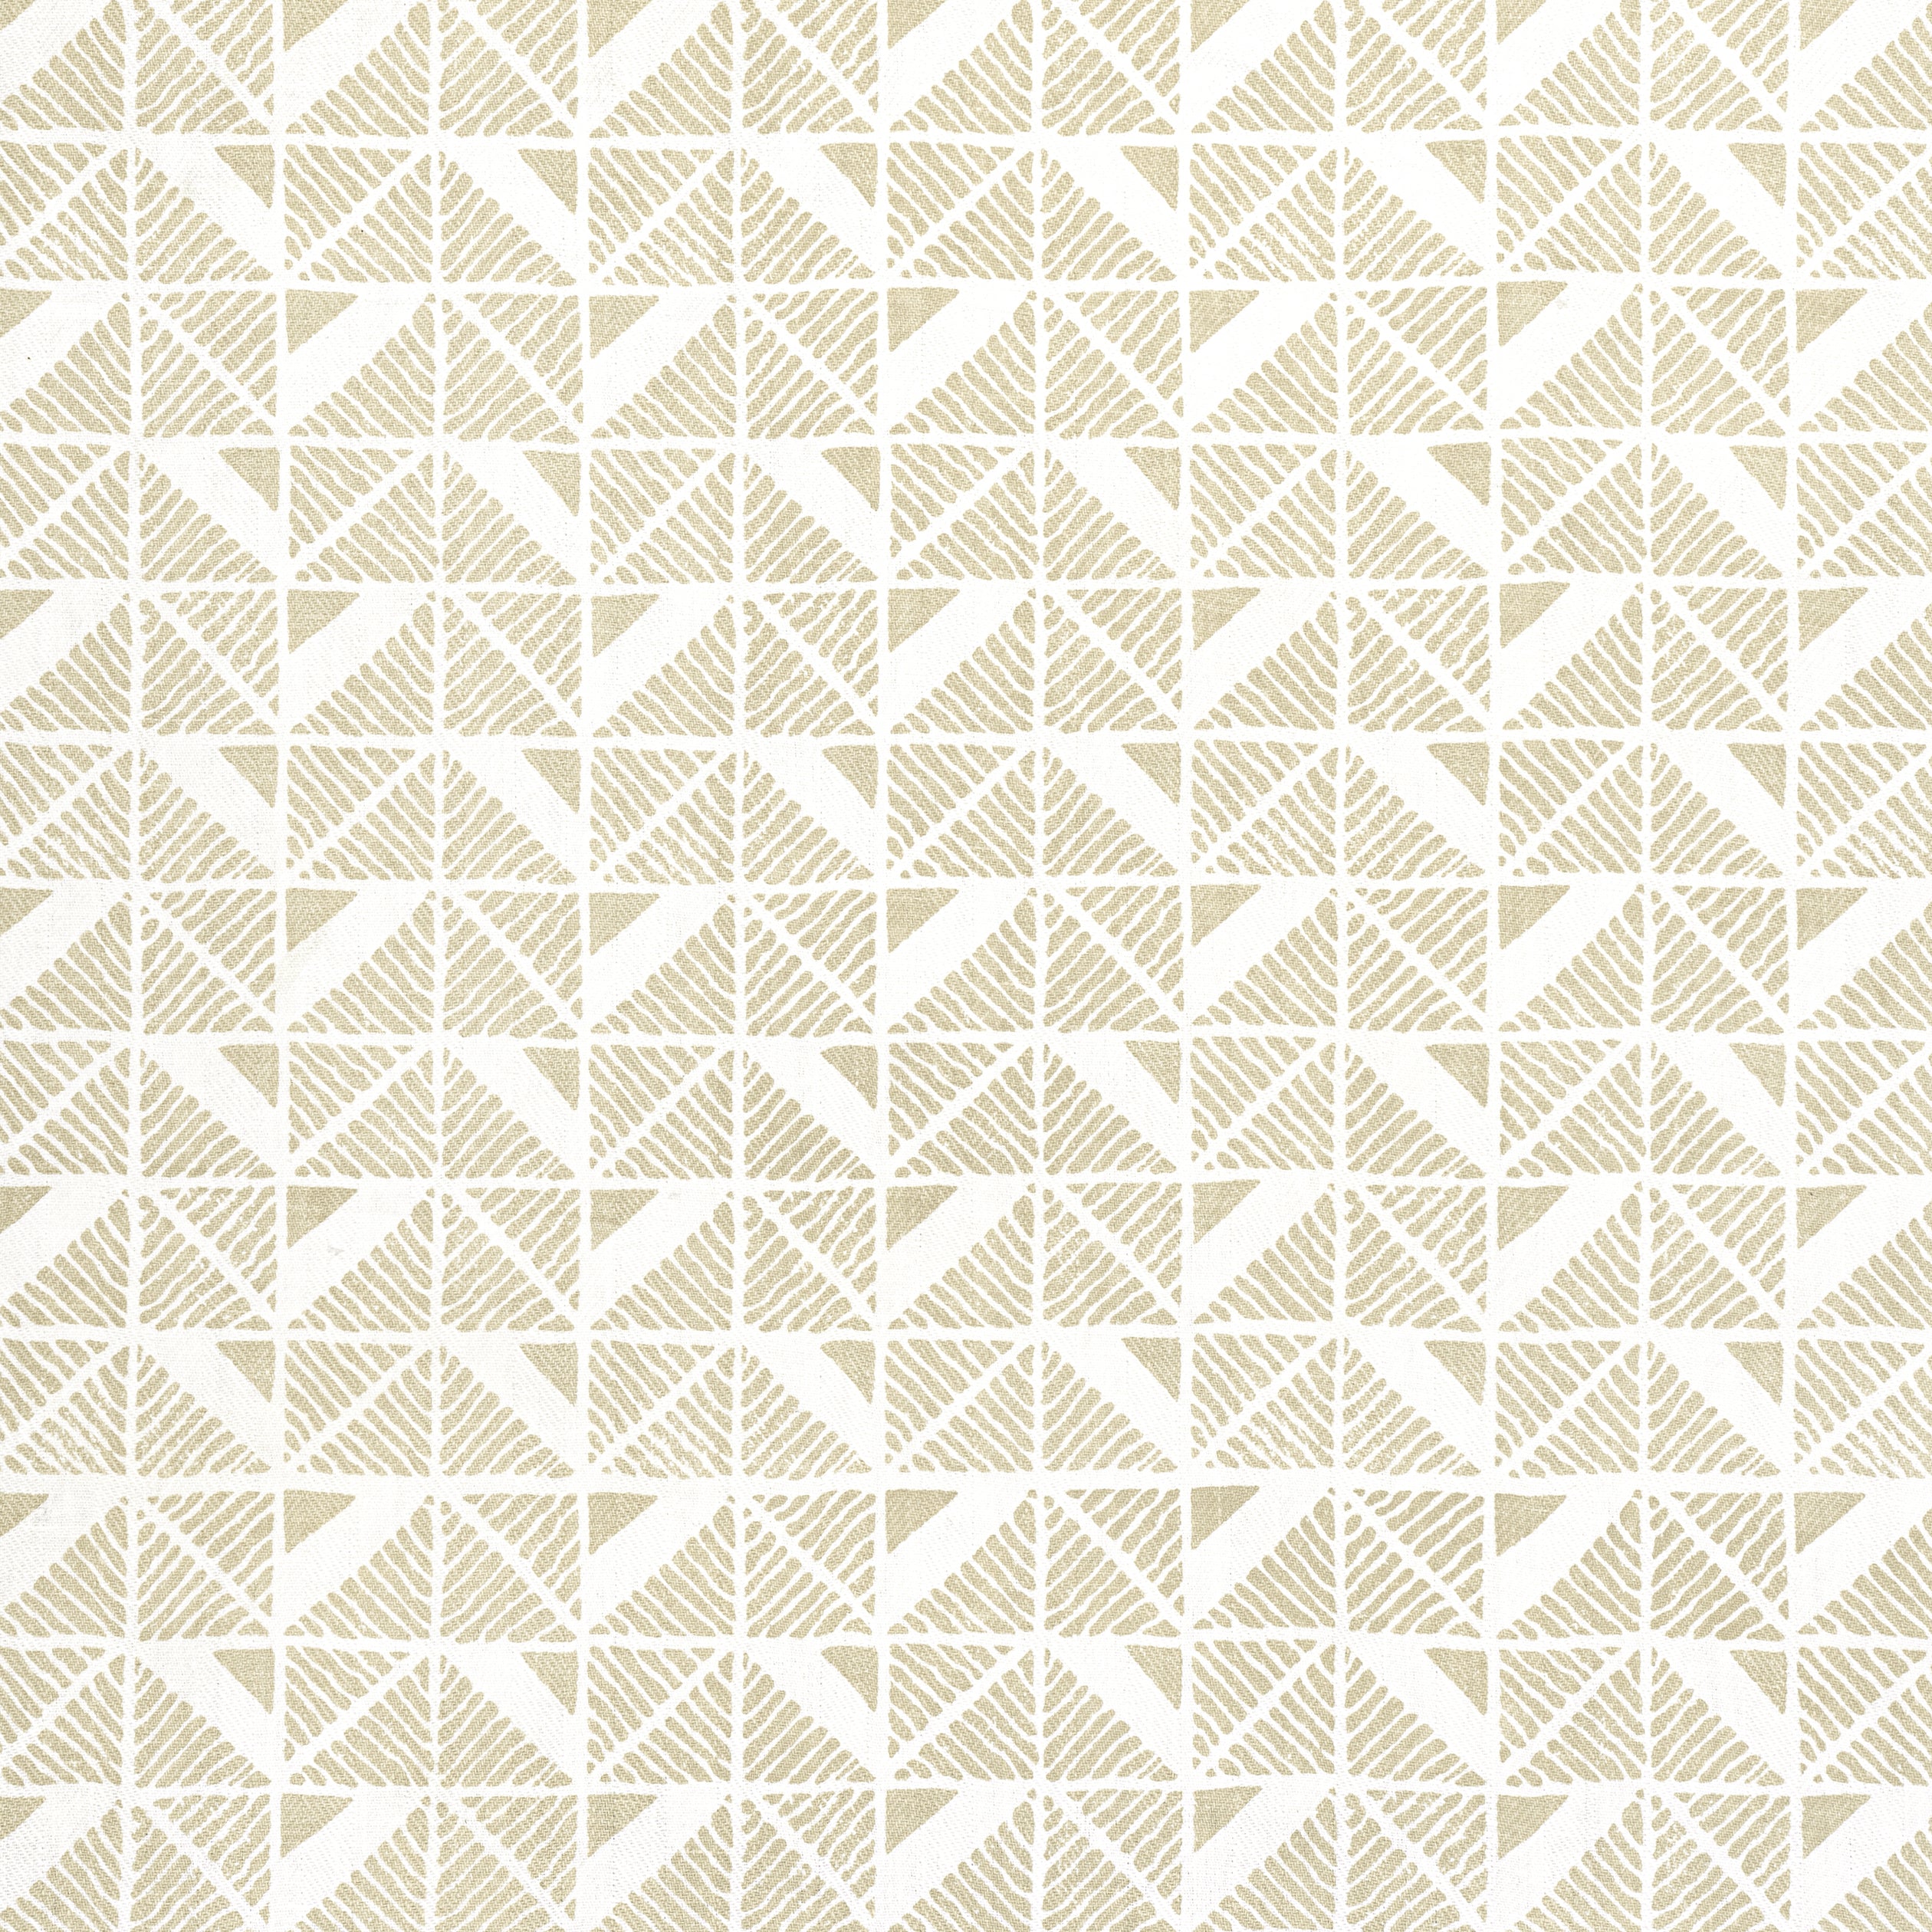 Bloomsbury Square fabric in beige color - pattern number AF23112 - by Anna French in the Willow Tree collection